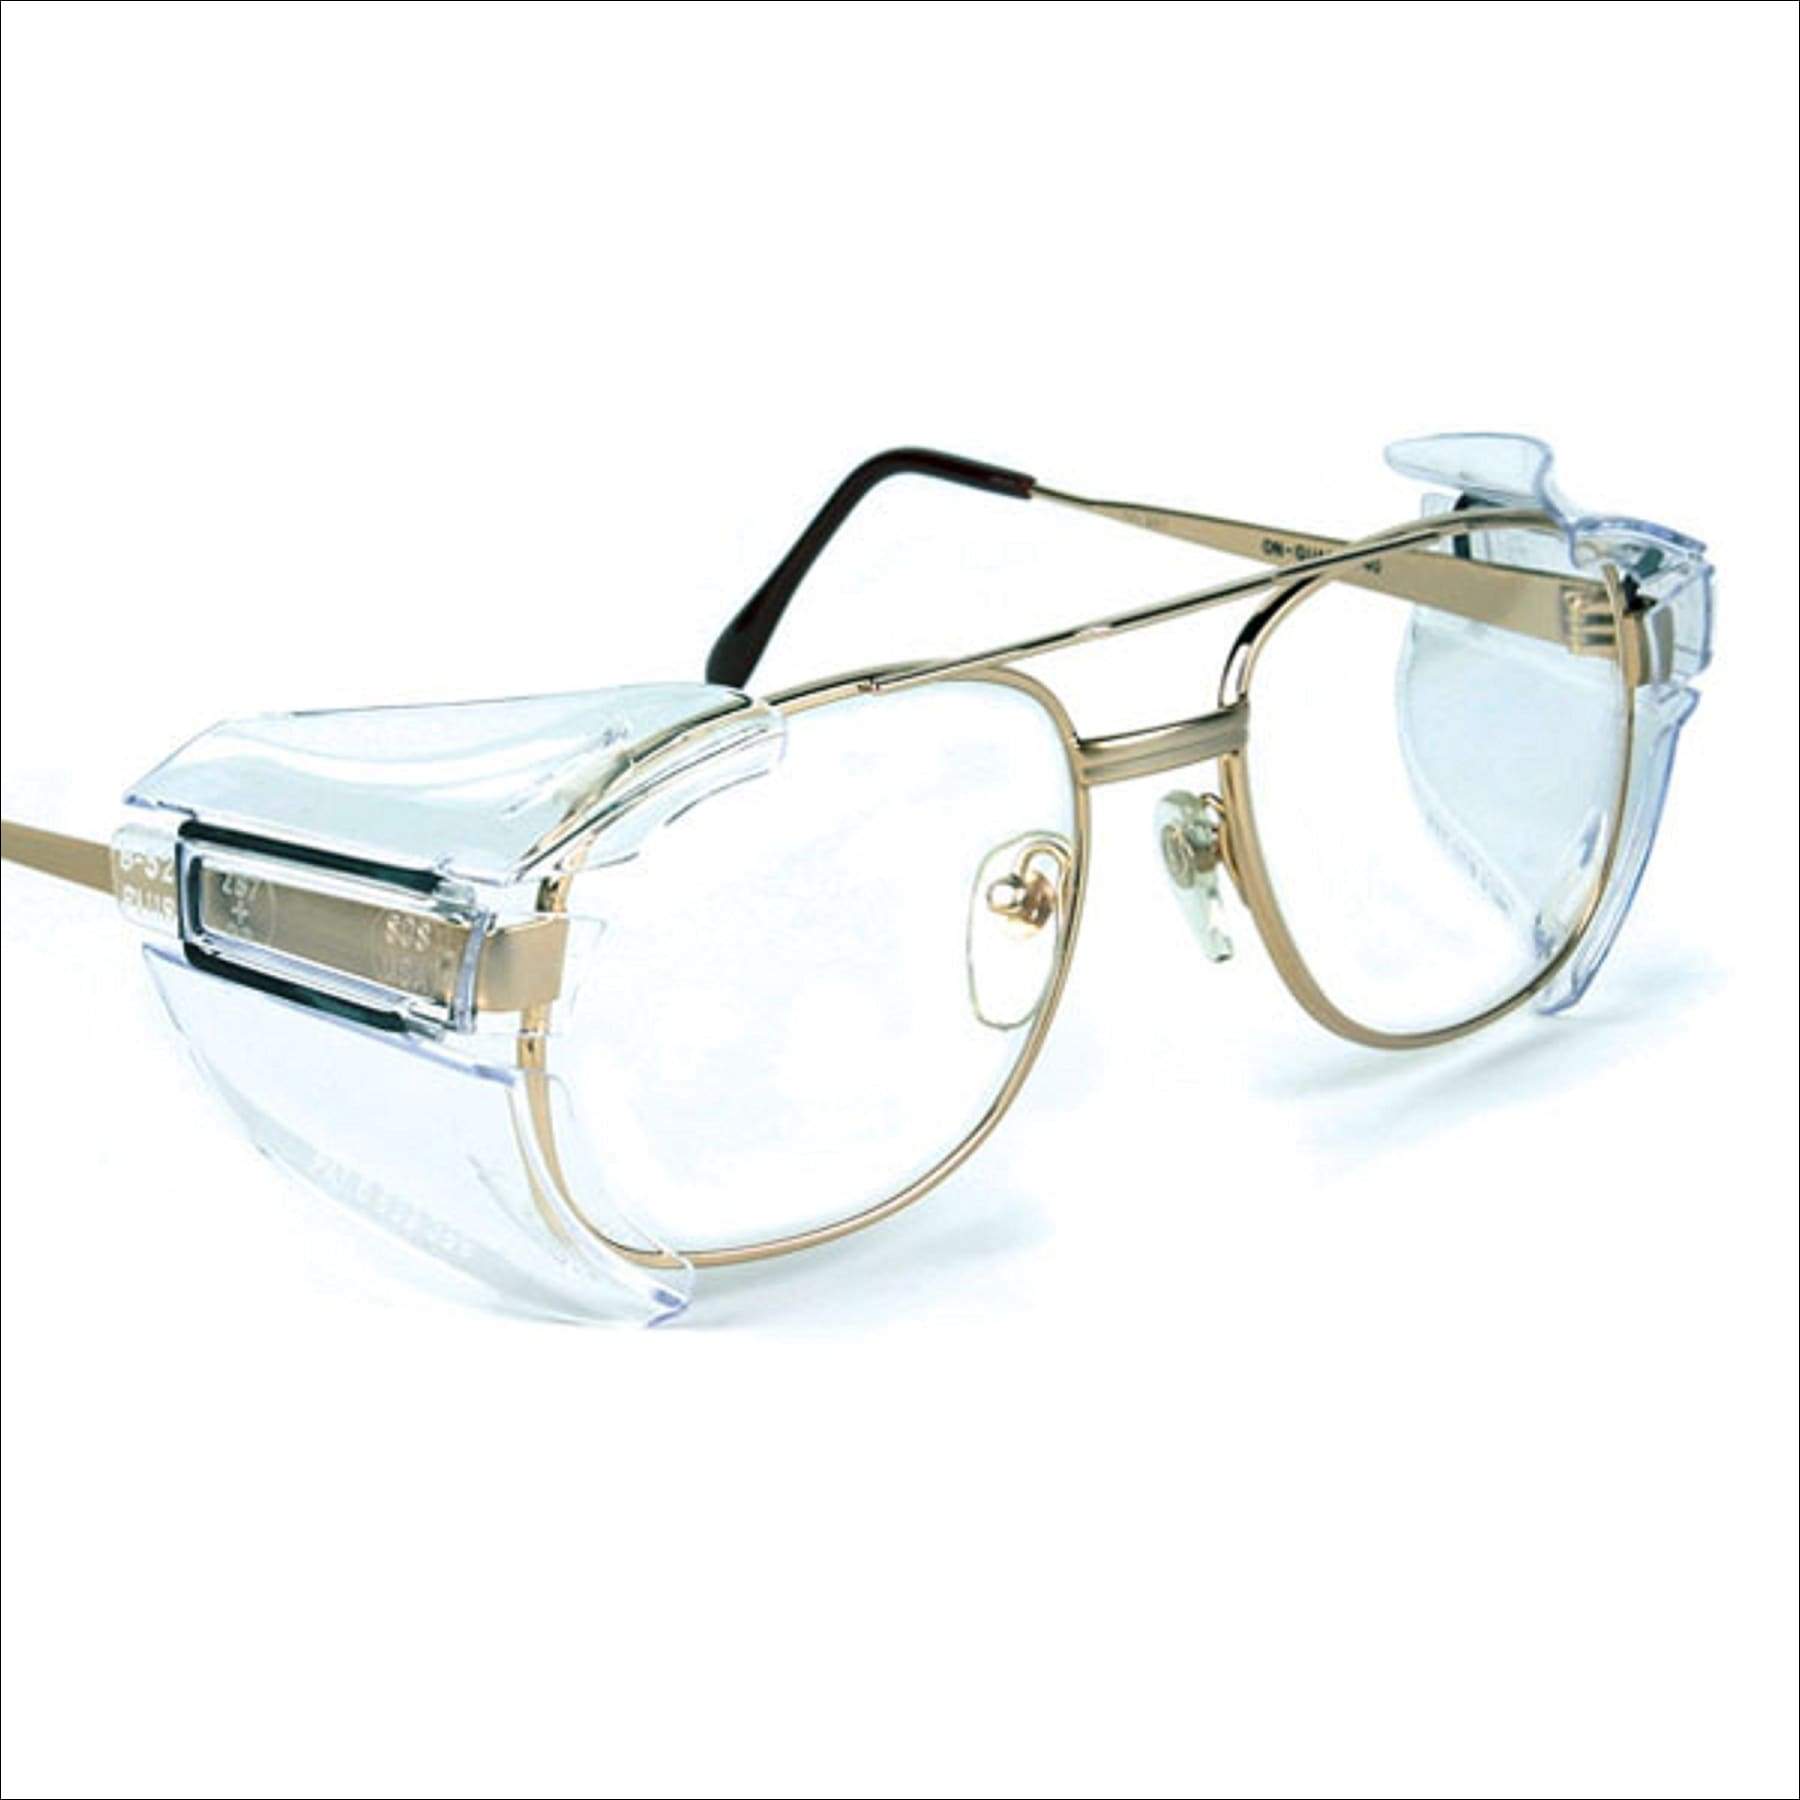 S O S B52 Clear Safety Glasses Side Shields For Medium To Large Glasses 3 Pair